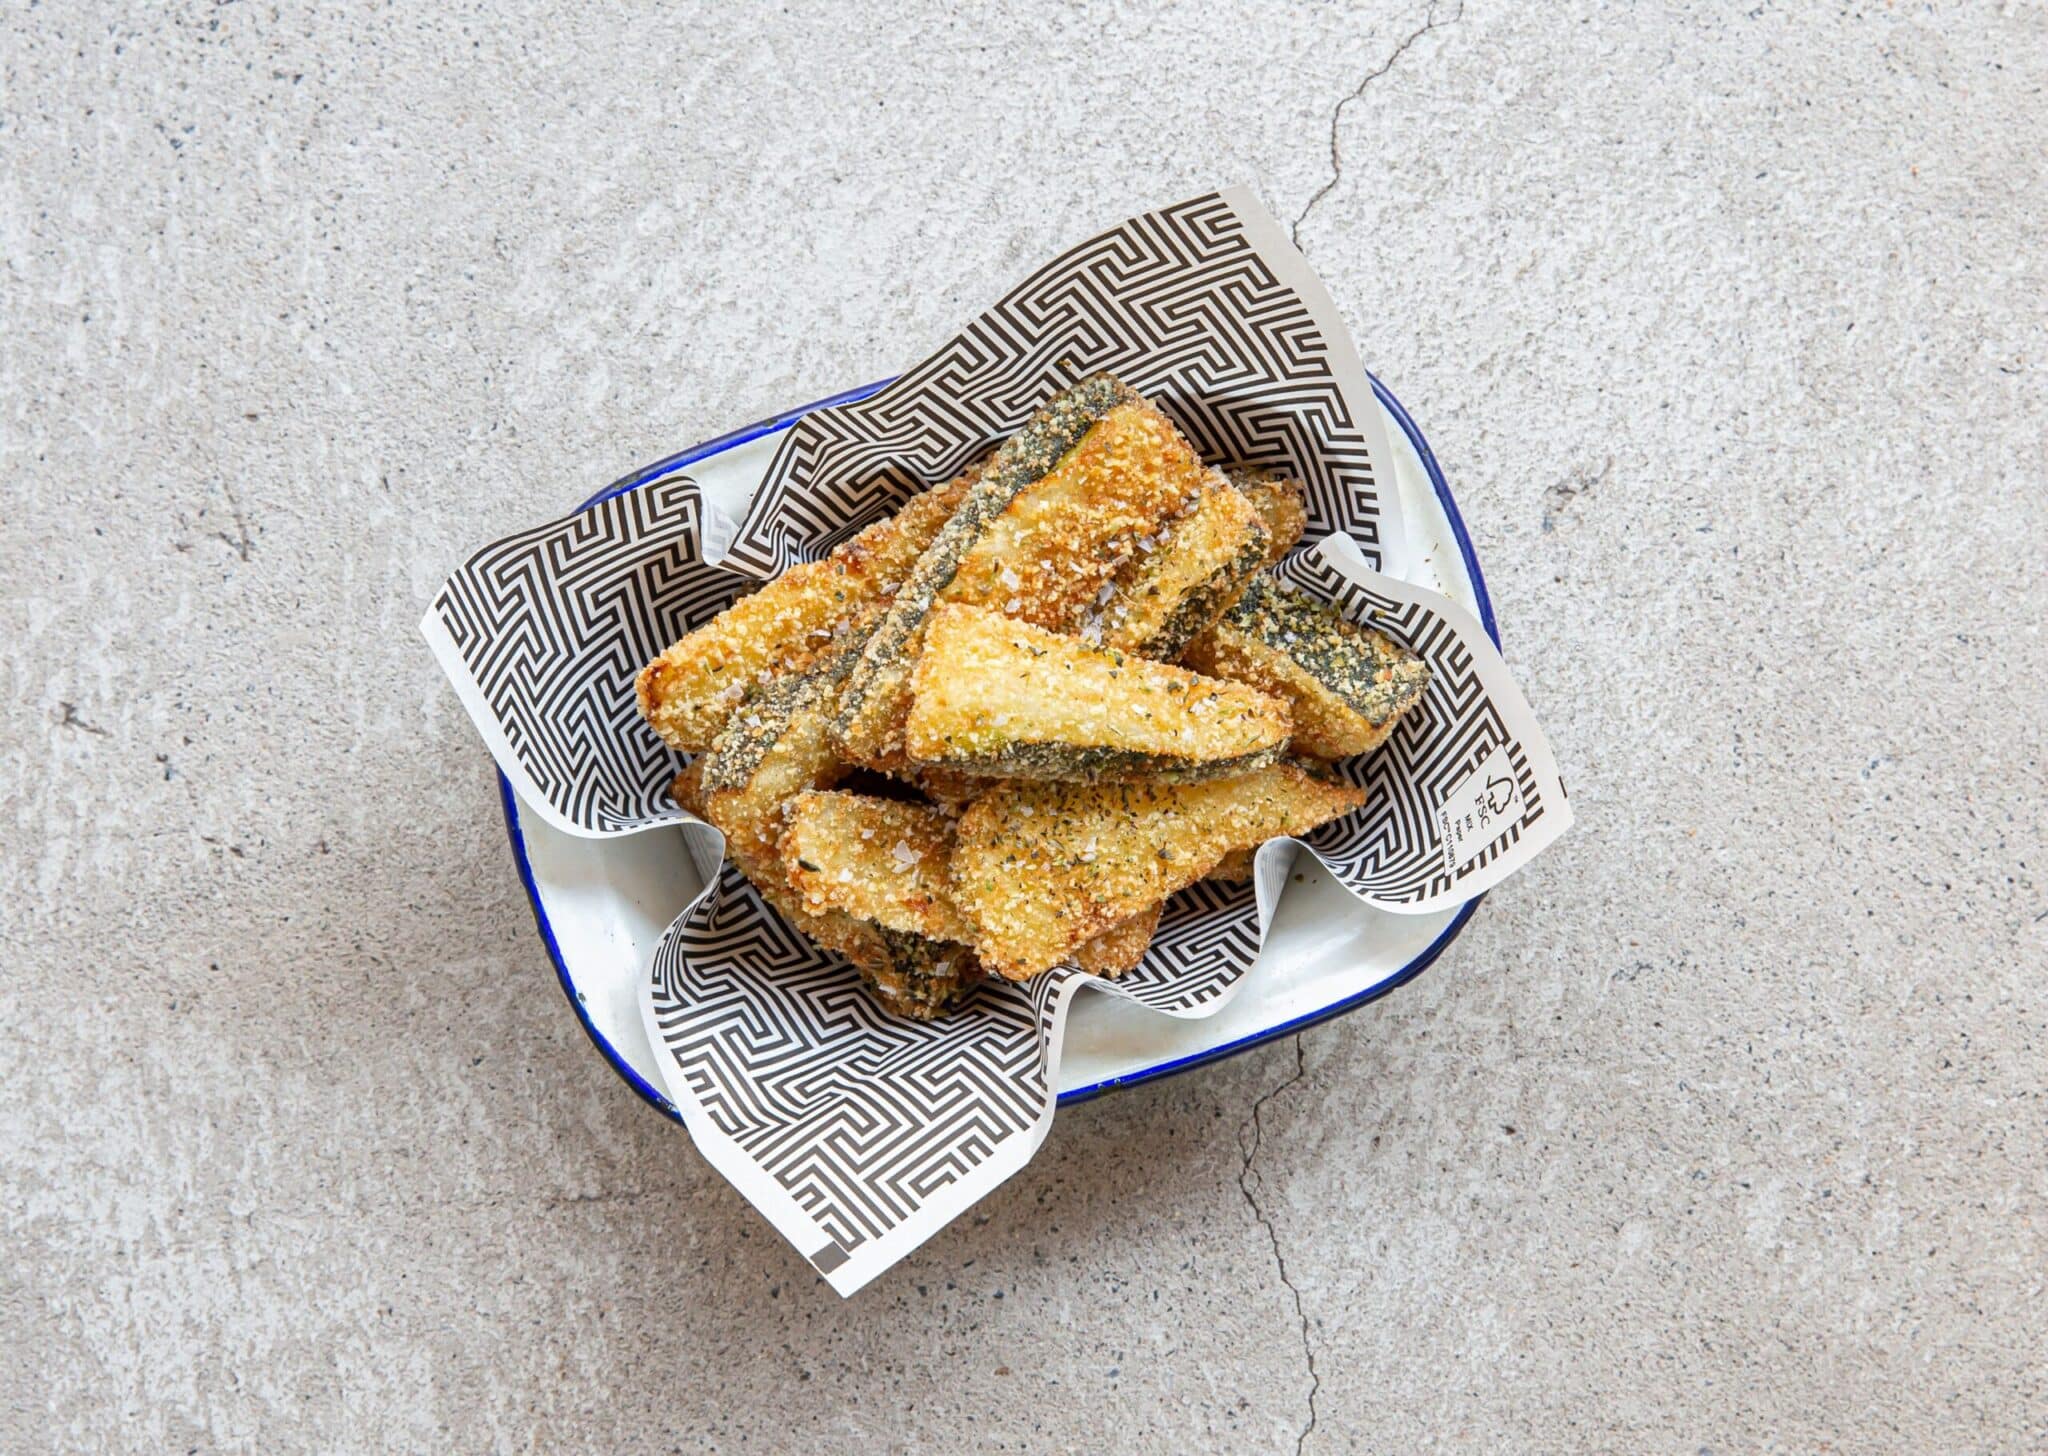 Our New Zucchini Fries Are Here!